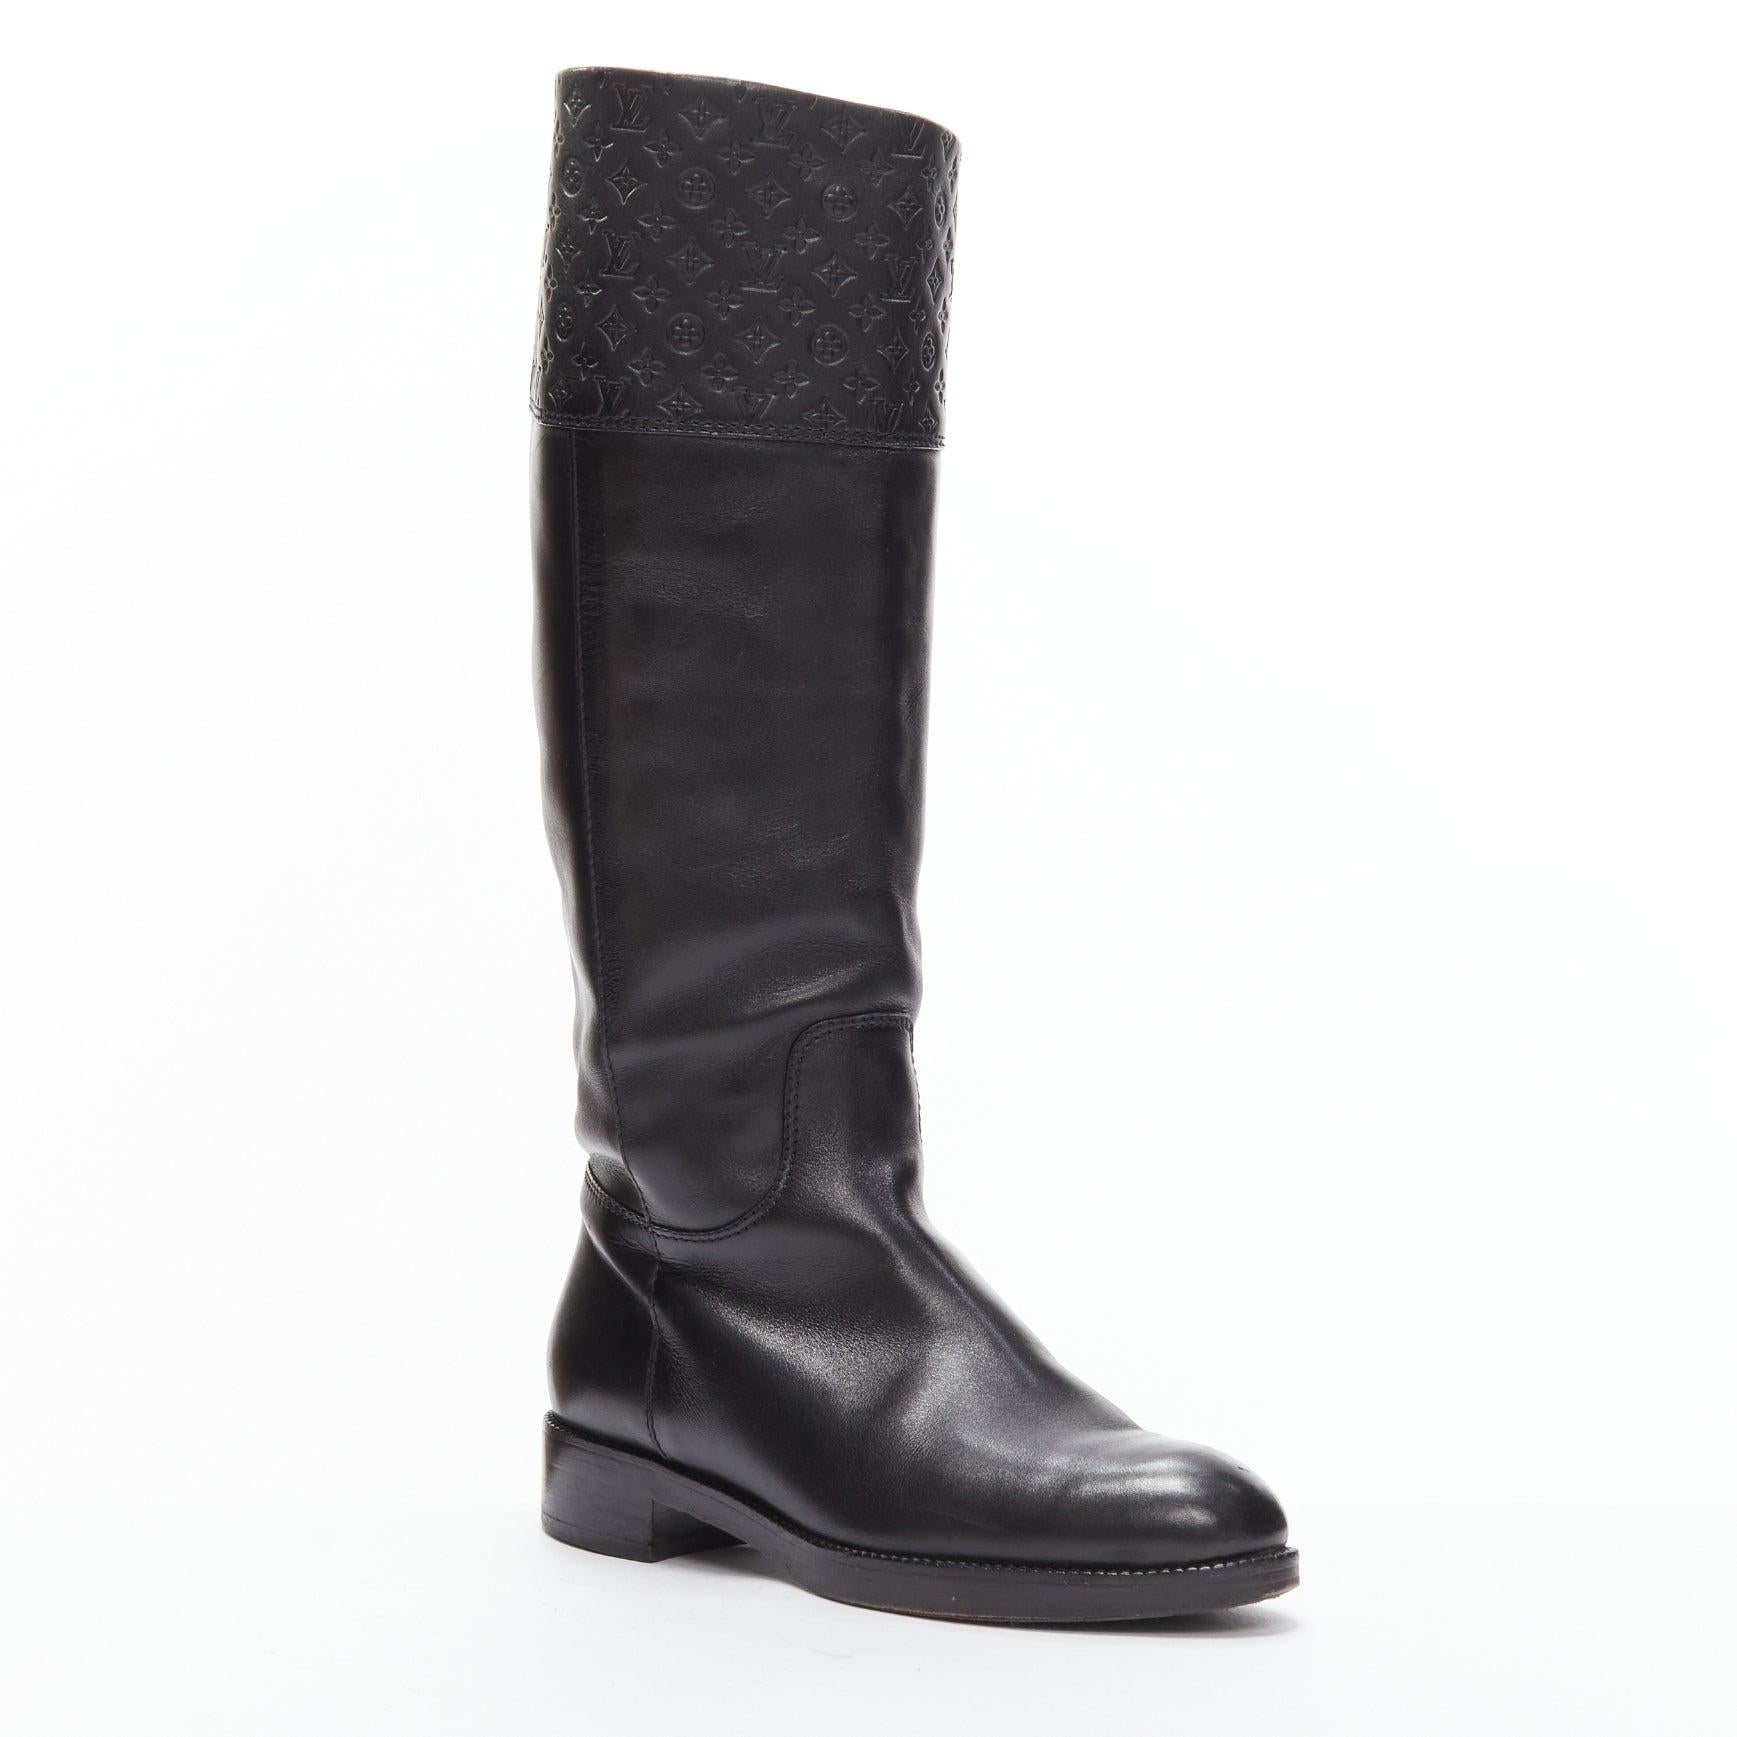 LOUIS VUITTON black LV monogram embossed leather pull on riding boots EU37.5
Reference: TGAS/D00671
Brand: Louis Vuitton
Material: Leather
Color: Black
Pattern: Monogram
Closure: Slip On
Lining: Black Leather
Extra Details: LV logo monogram embossed